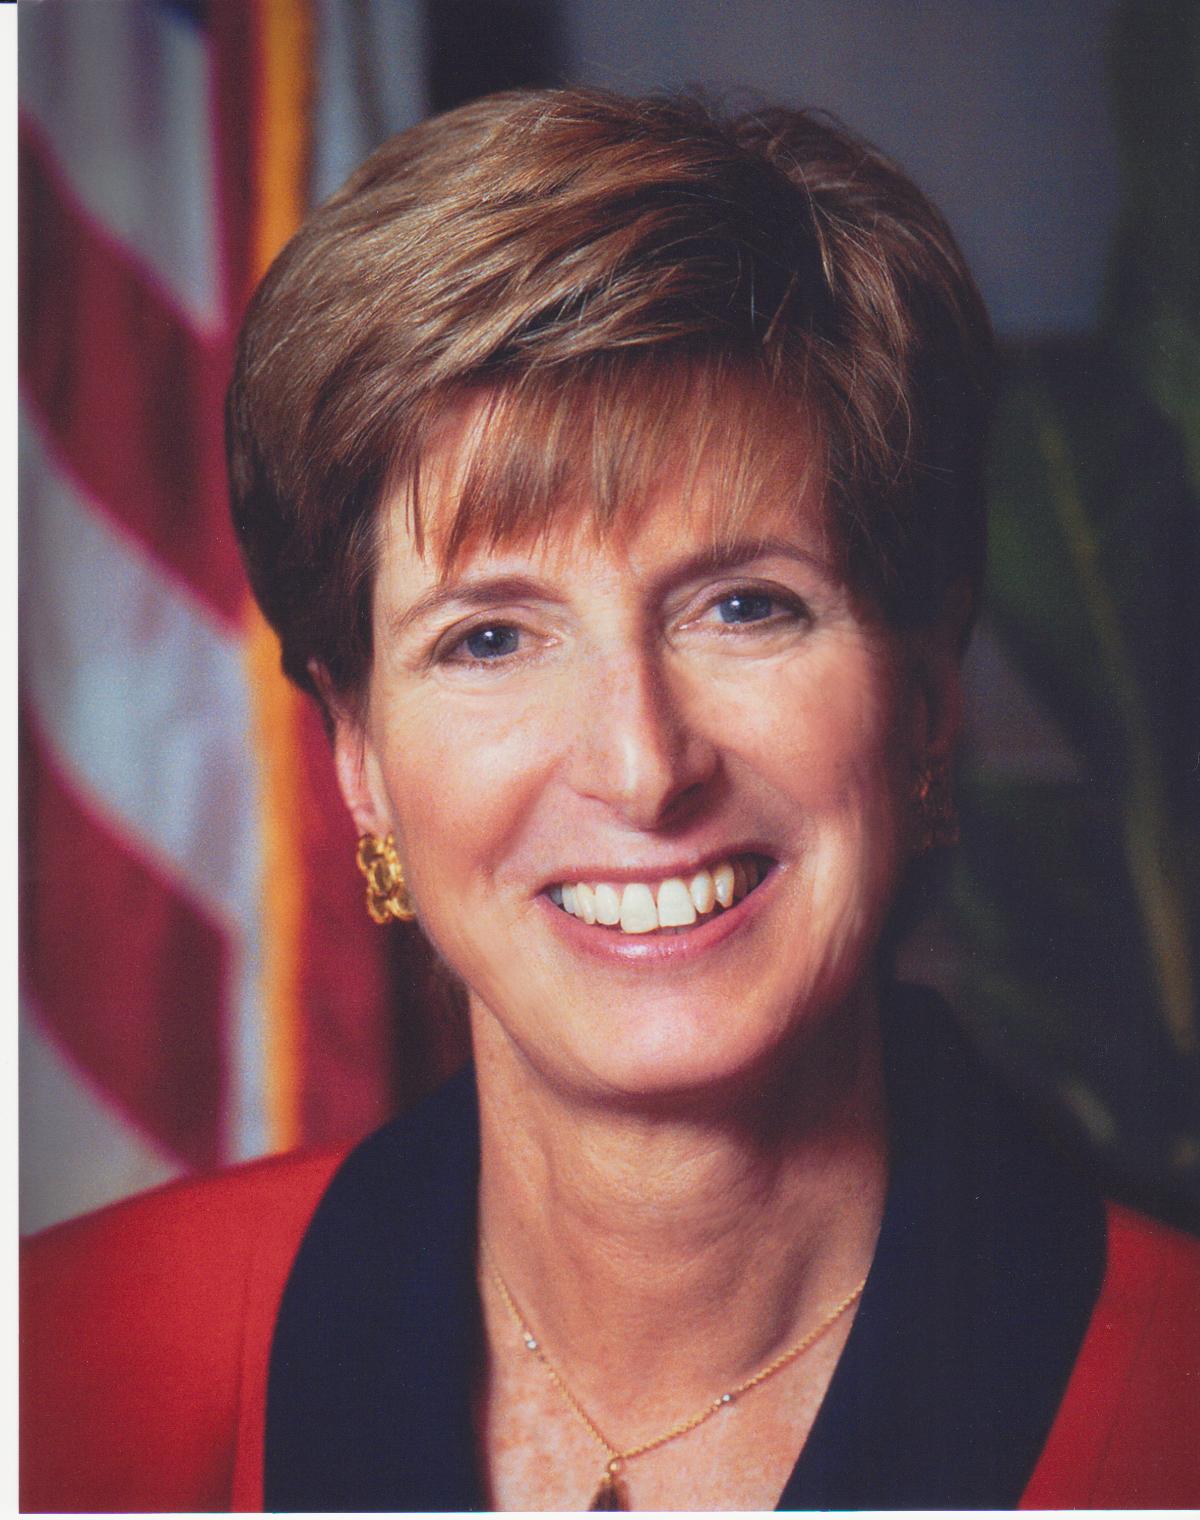 Discussion with Gov. Christine Todd Whitman: Climate Change Calls for Clean and Safe Energy